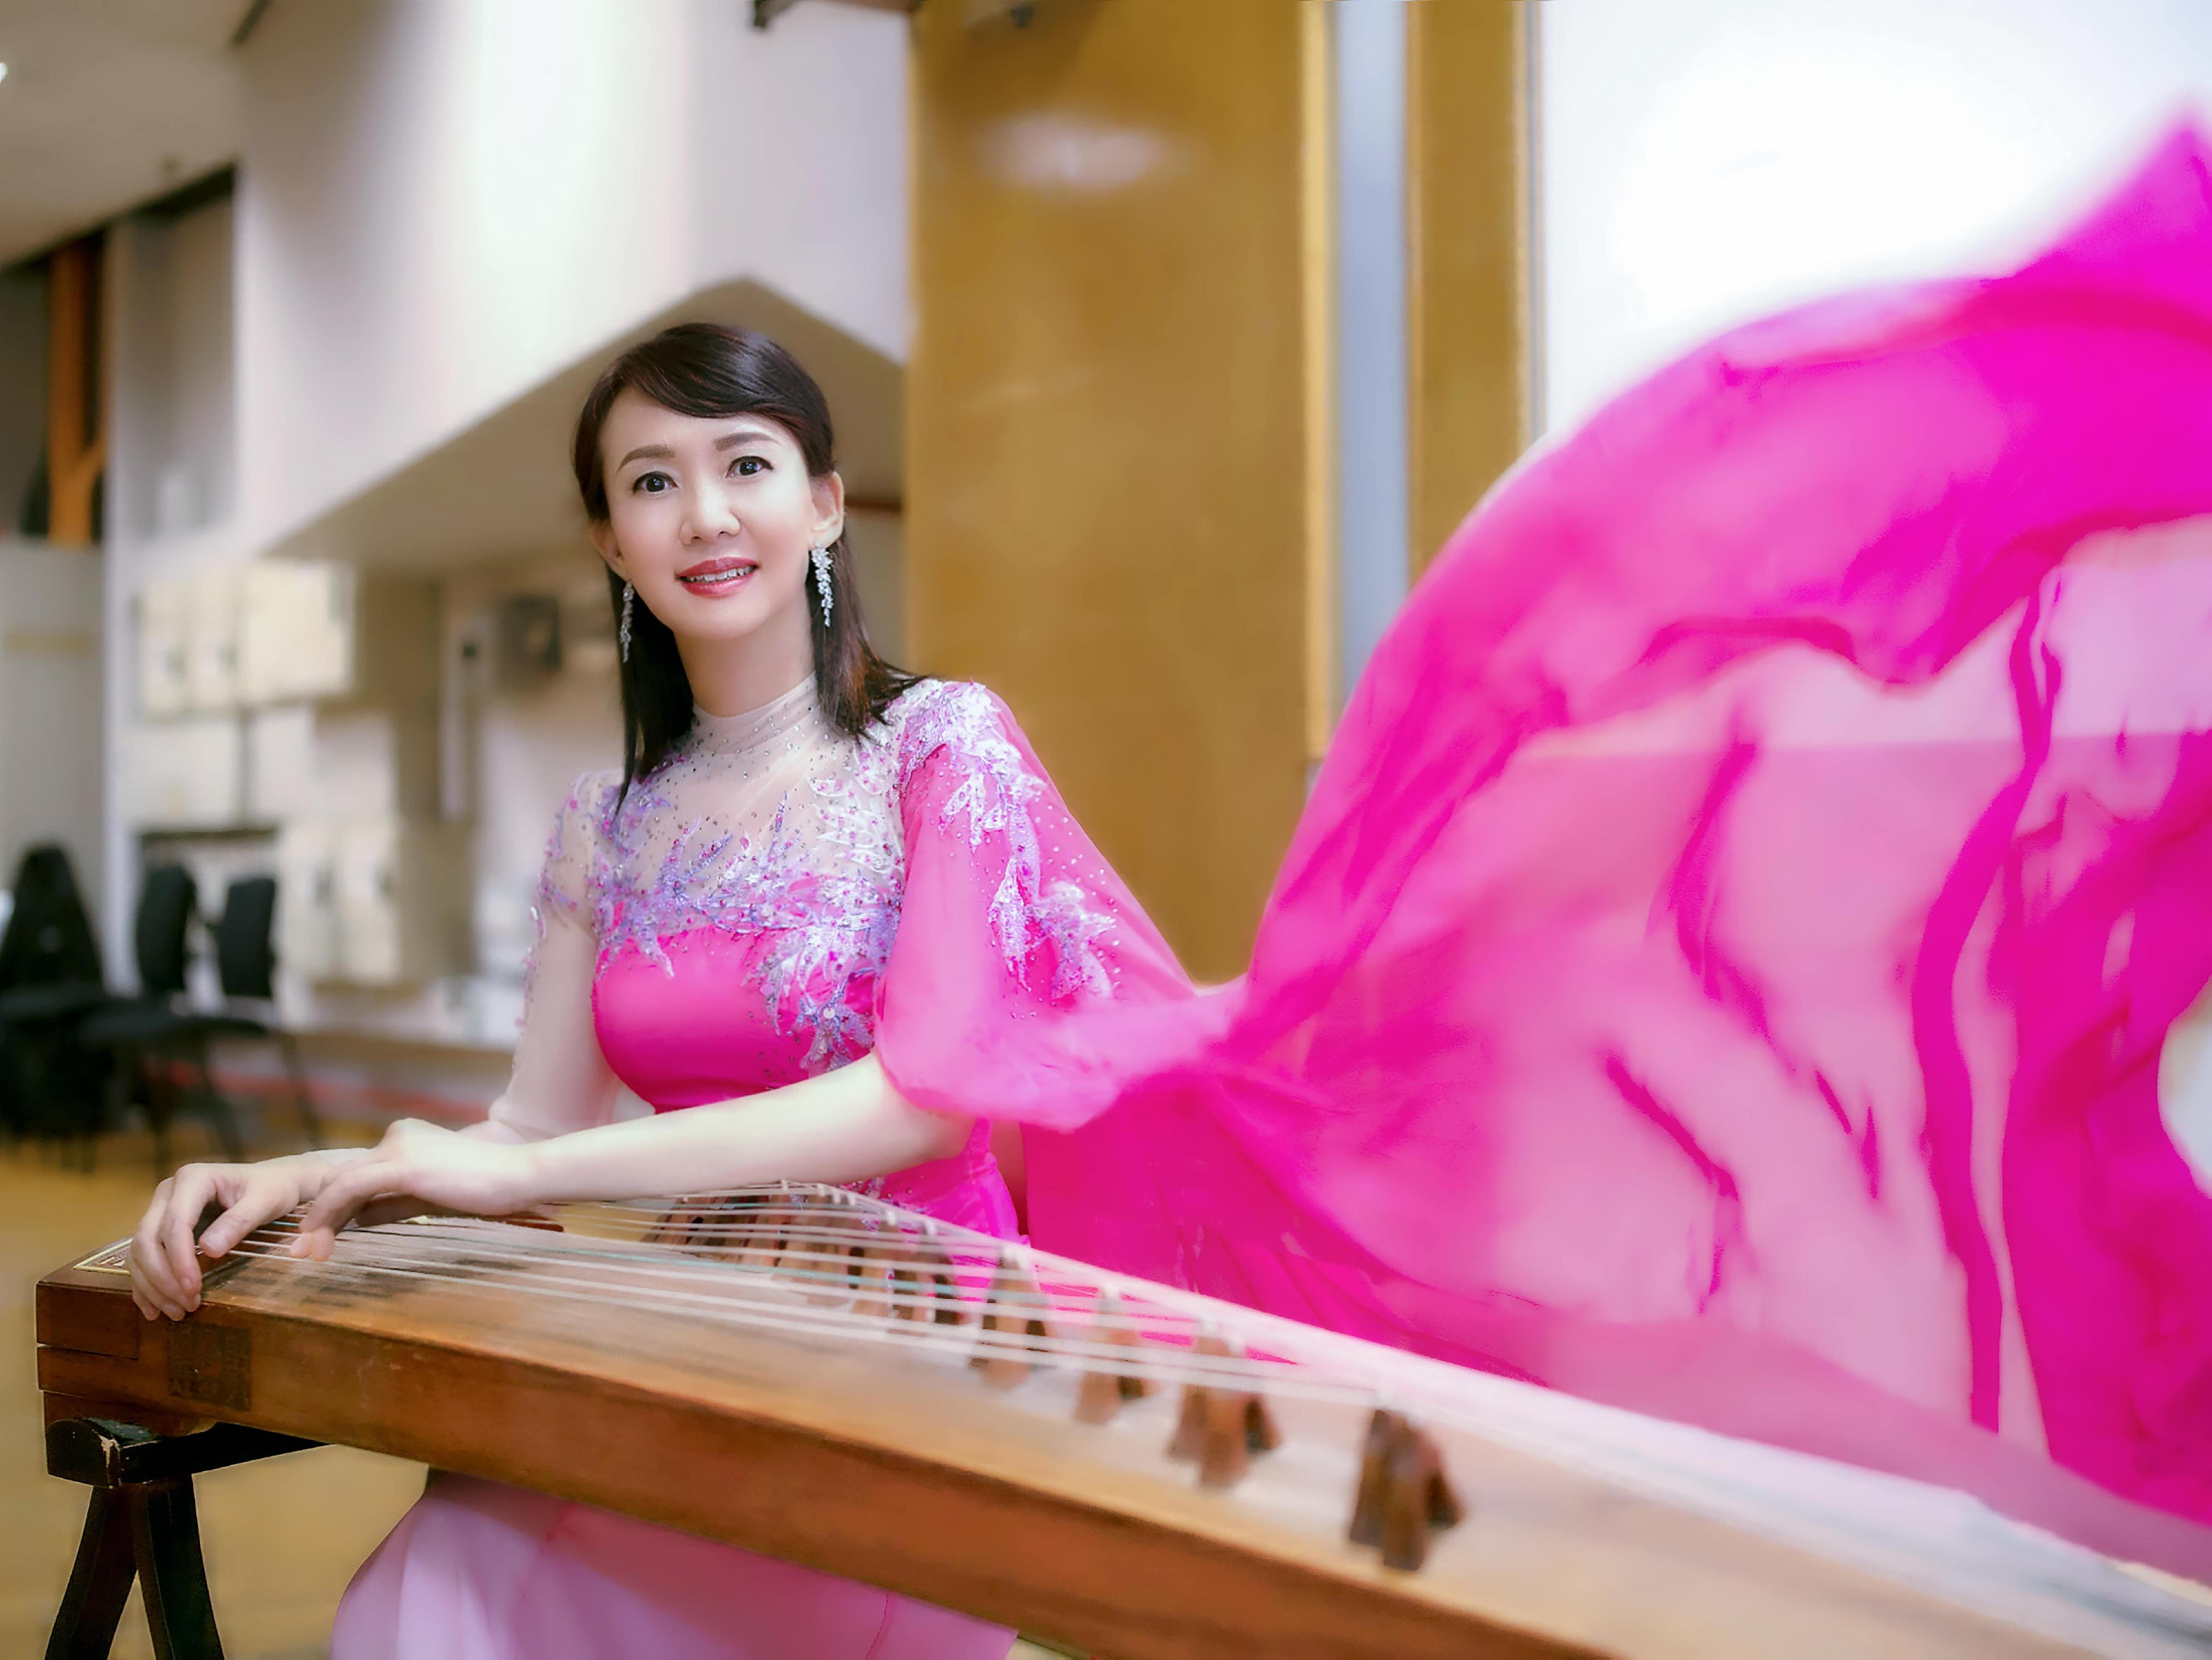 The Leisure and Cultural Services Department will present "City Hall Virtuosi" Series: Guzheng Recital by Xu Lingzi and Ng Hiu-hung in October. Photo shows Ng.